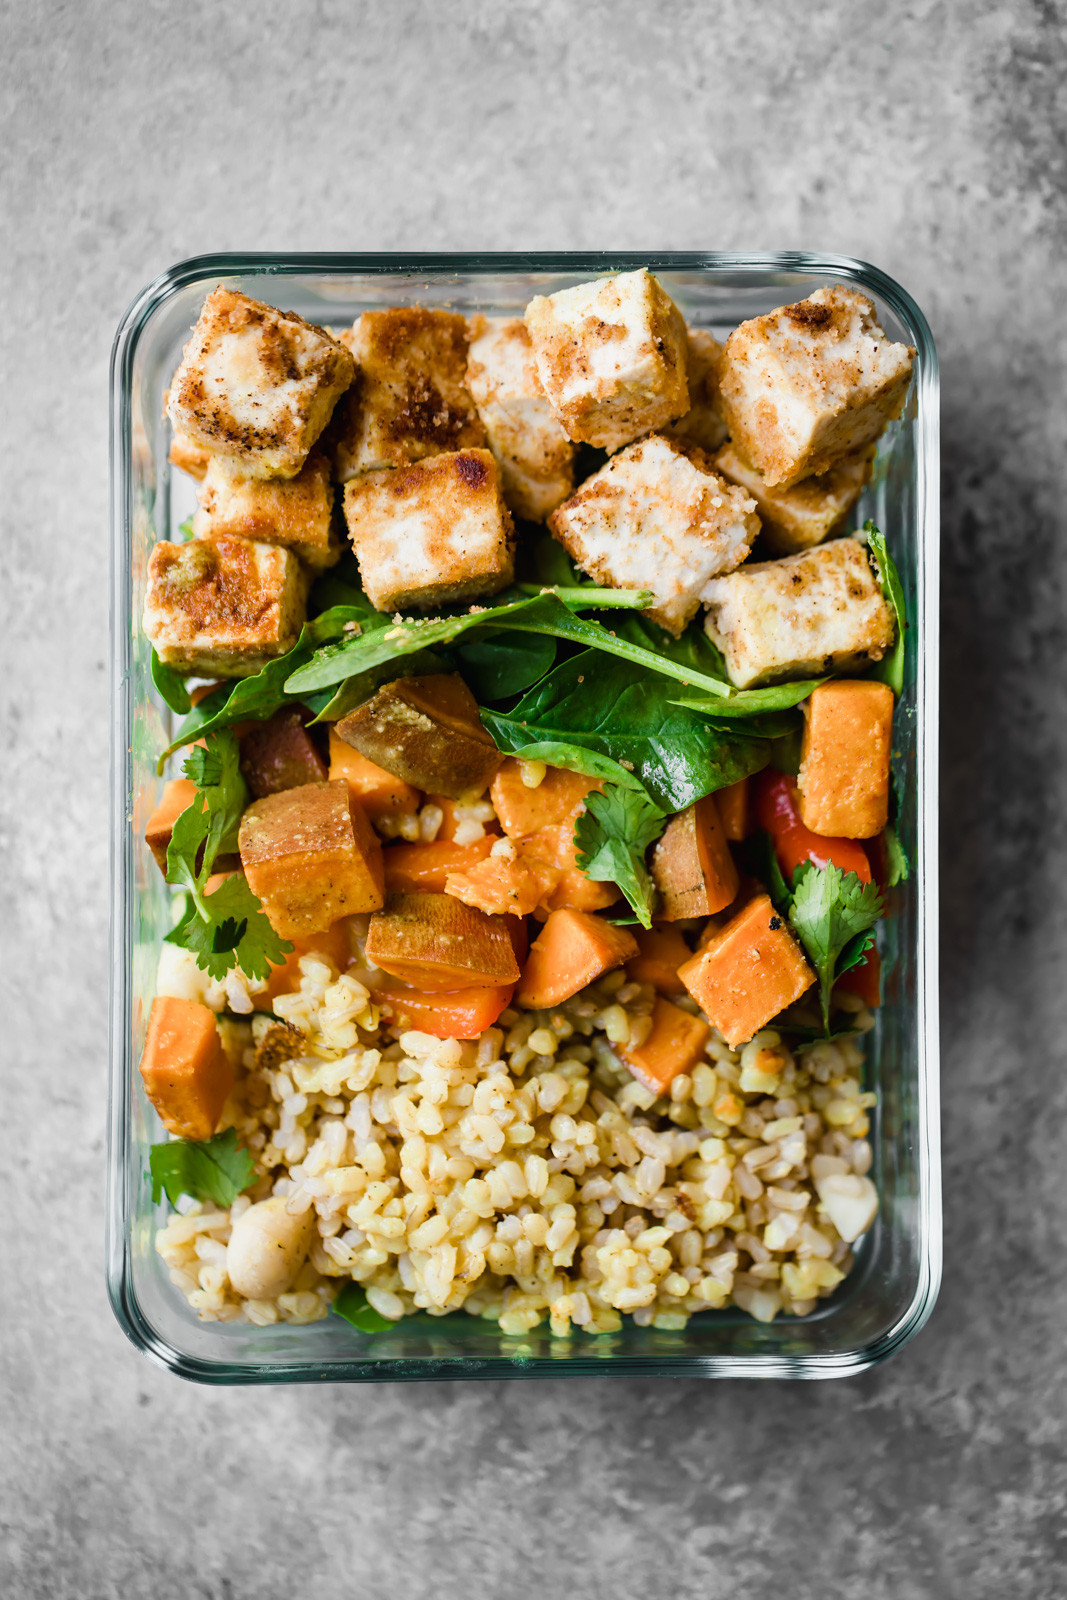 Healthy Vegan Lunches
 15 Delicious Vegan Lunch Recipes that are Perfect for Meal